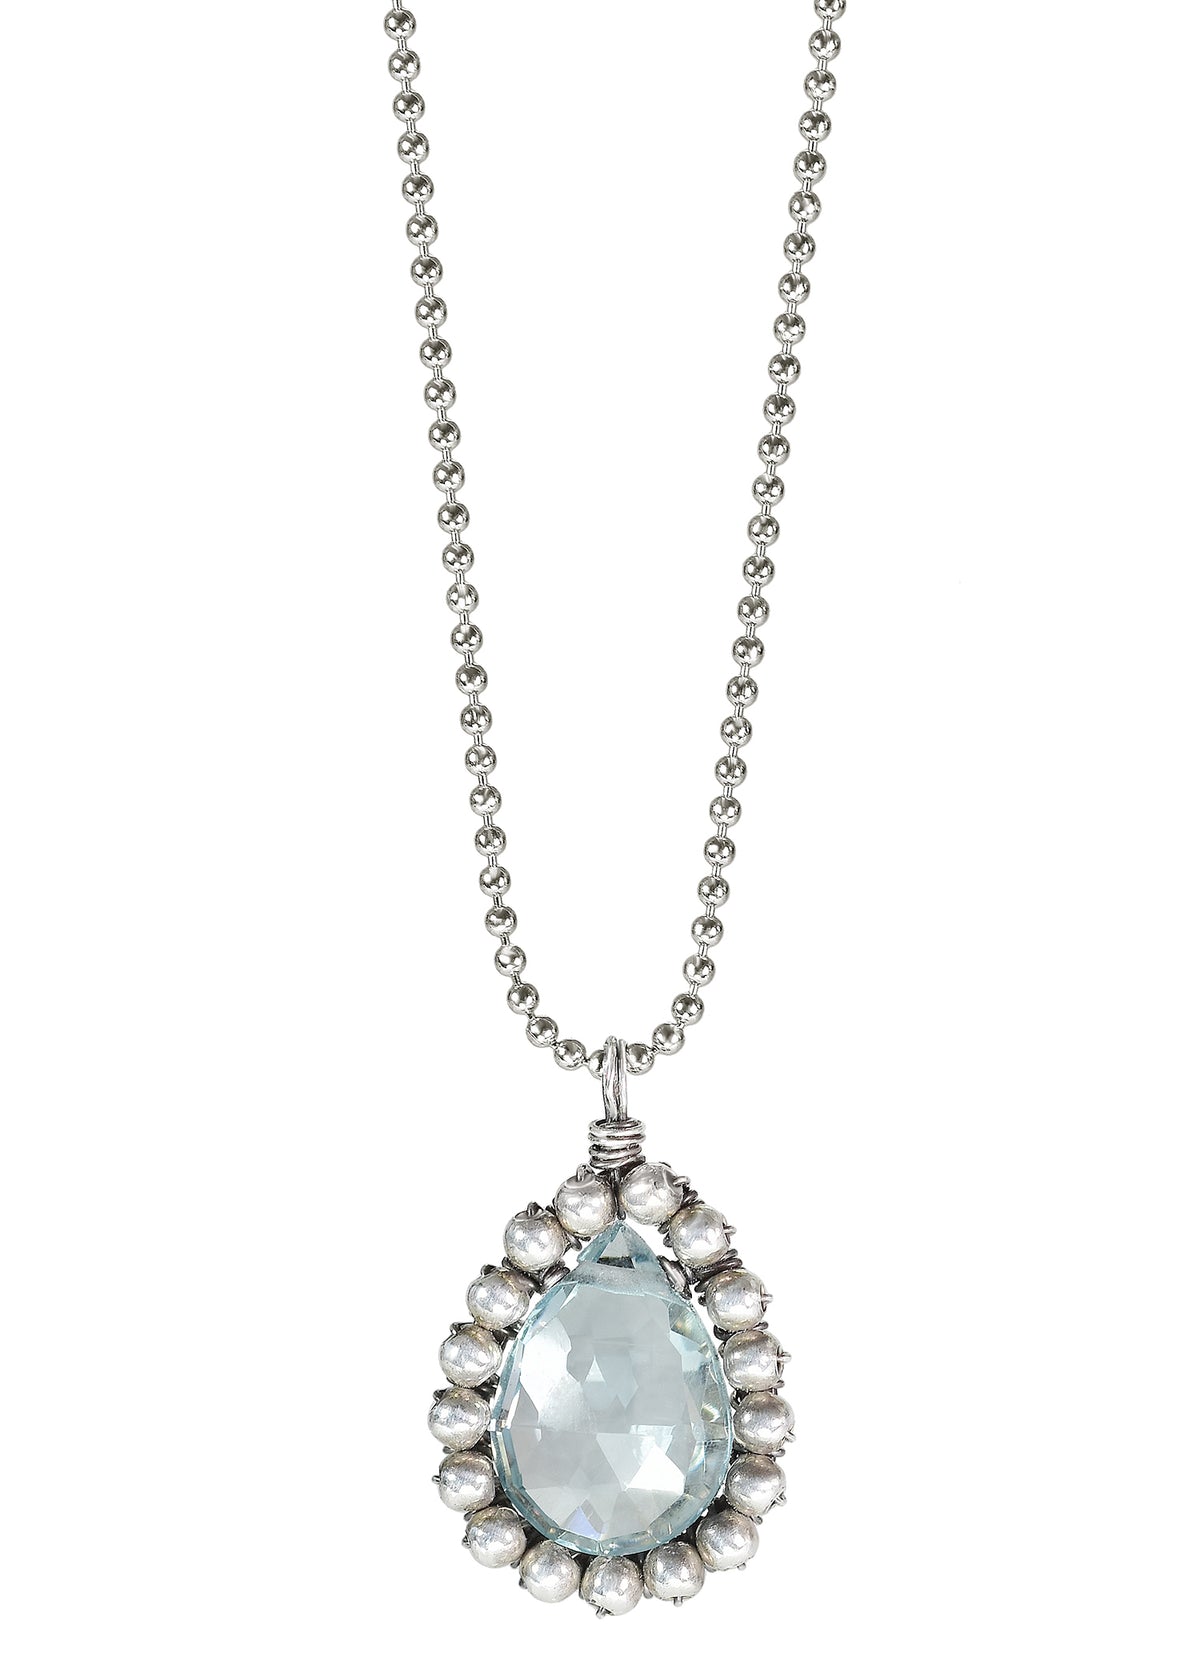 Aqua quartz Sterling silver Necklace measures 16&quot; in length Pendant measures 5/8&quot; in length and 7/16&quot; in width at the widest point Handmade in our Los Angeles studio